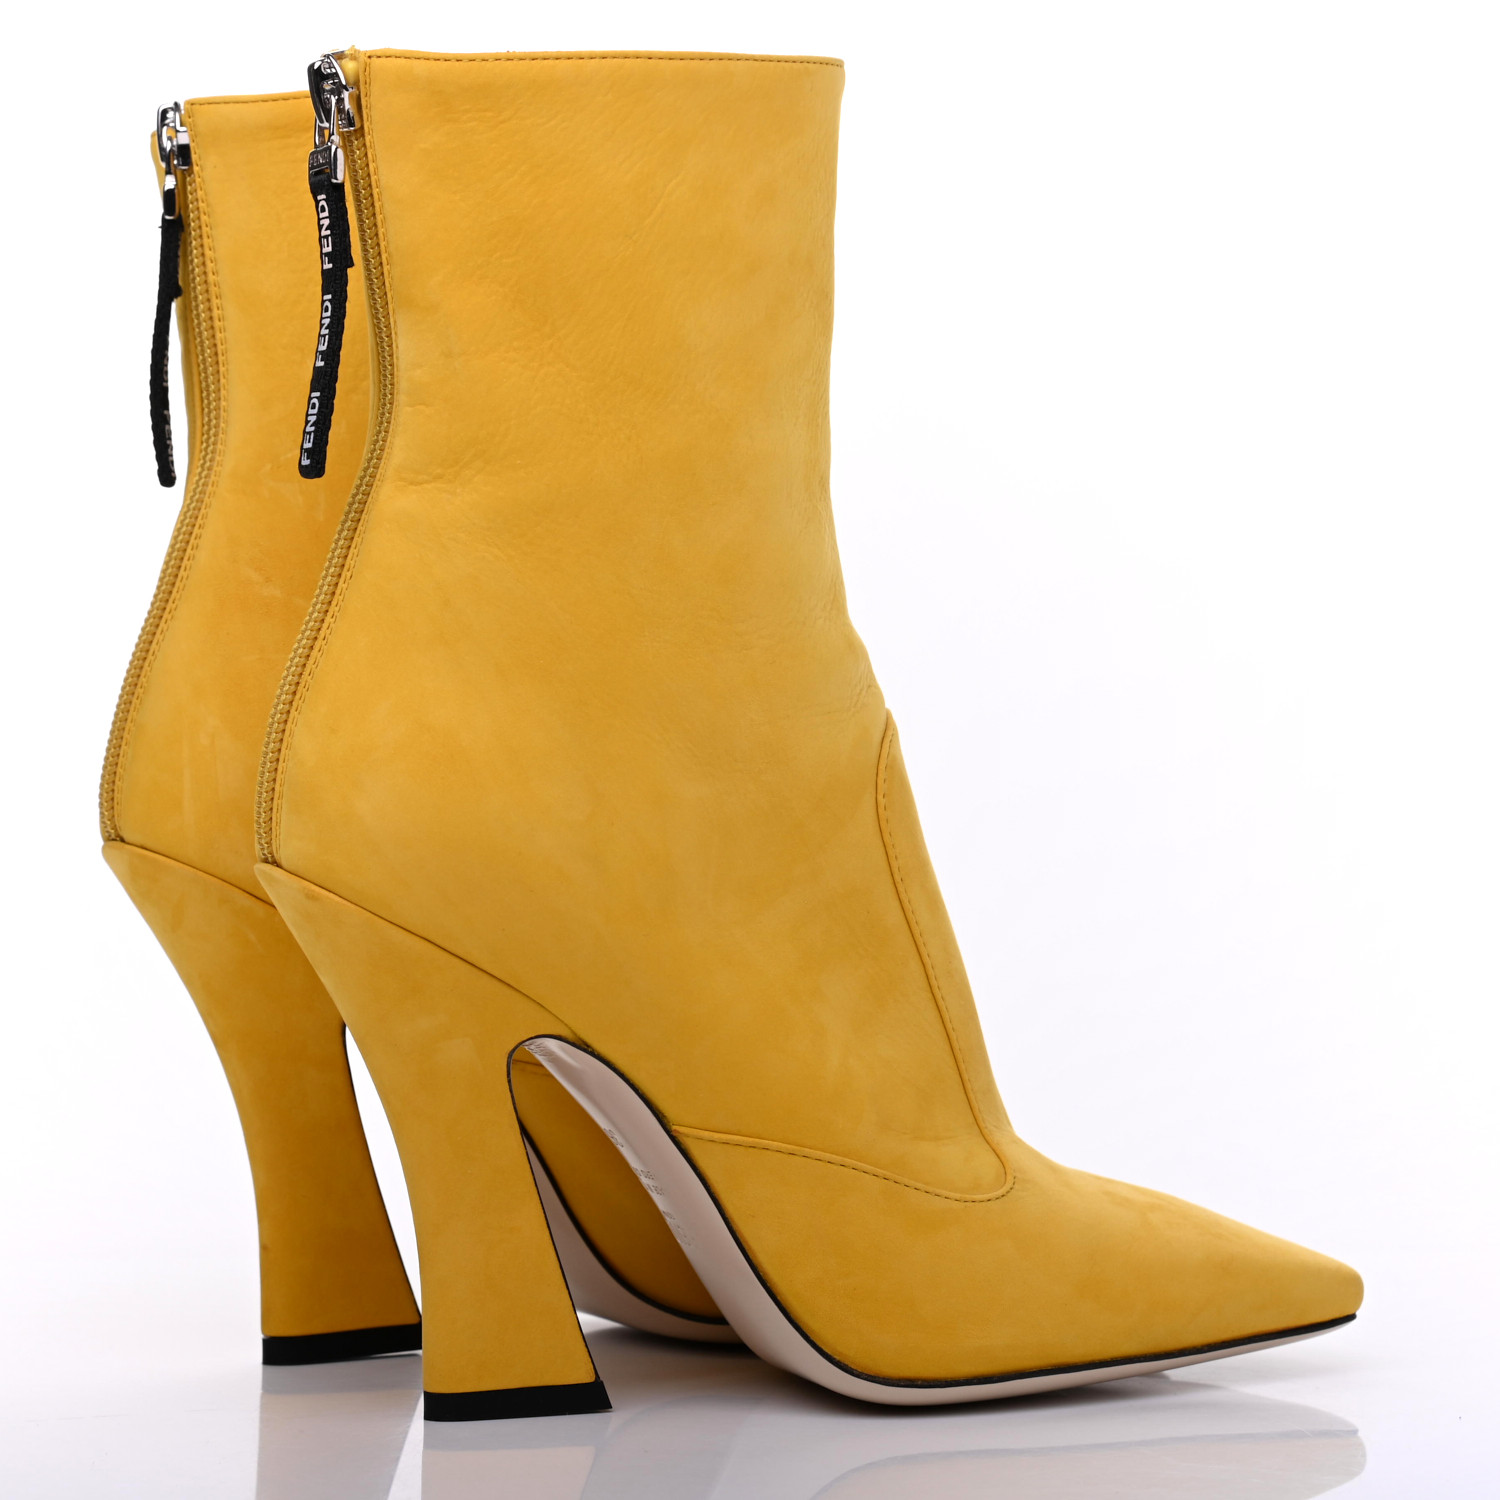 FENDI Suede FFreedom Ankle Boots 36 Yellow 765534 | FASHIONPHILE